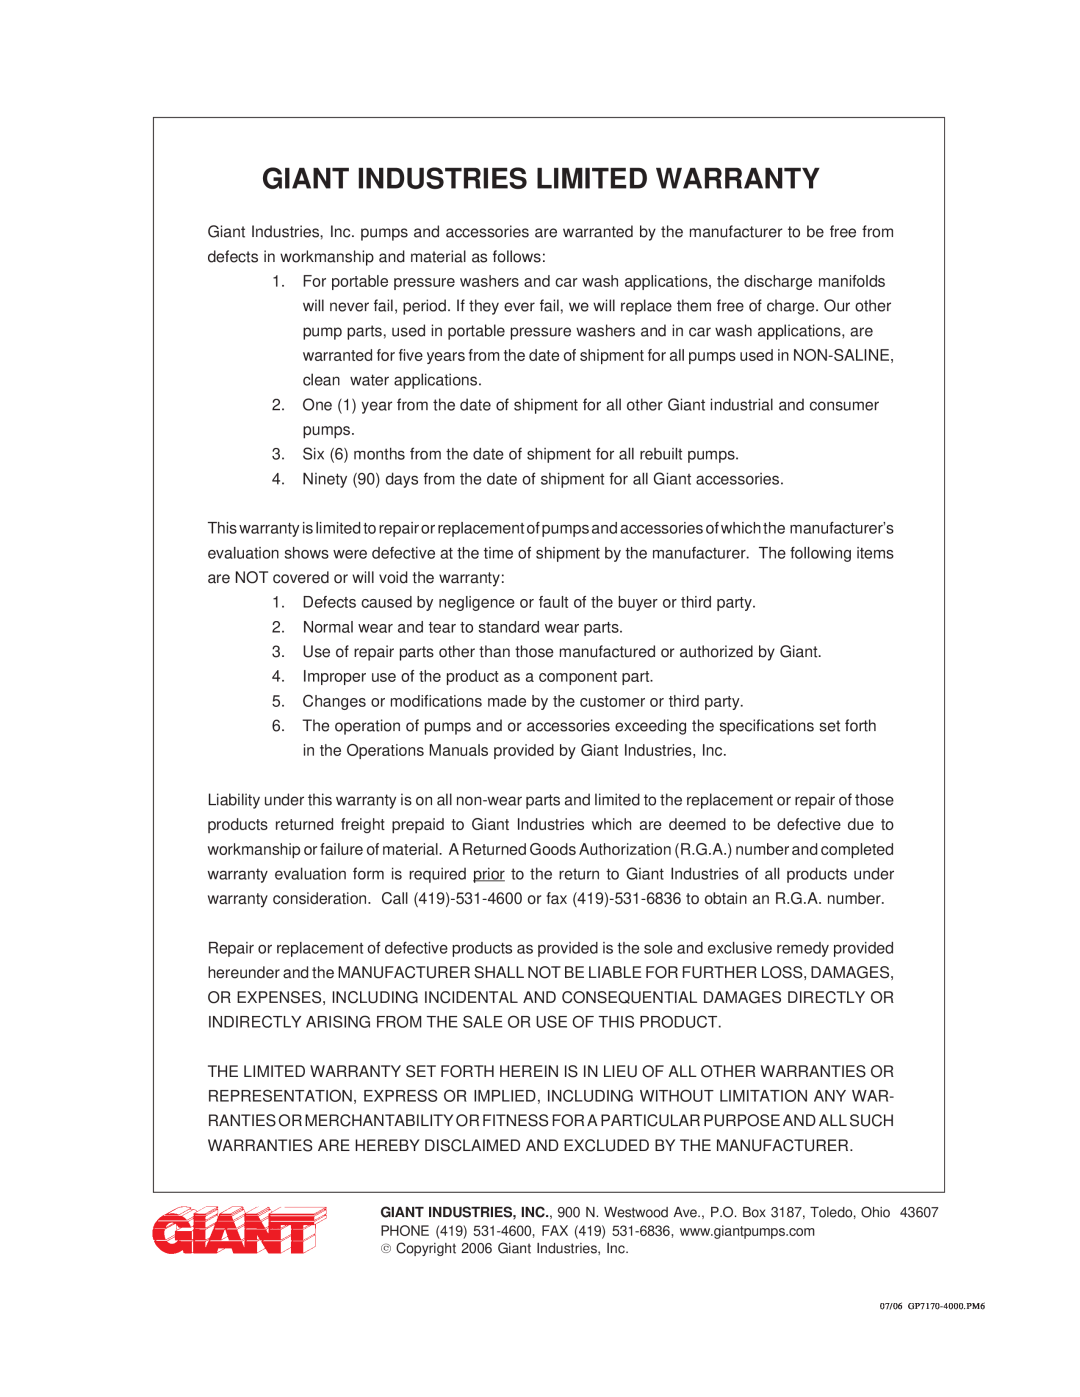 Giant GP7170-4000 installation instructions Giant Industries Limited Warranty 